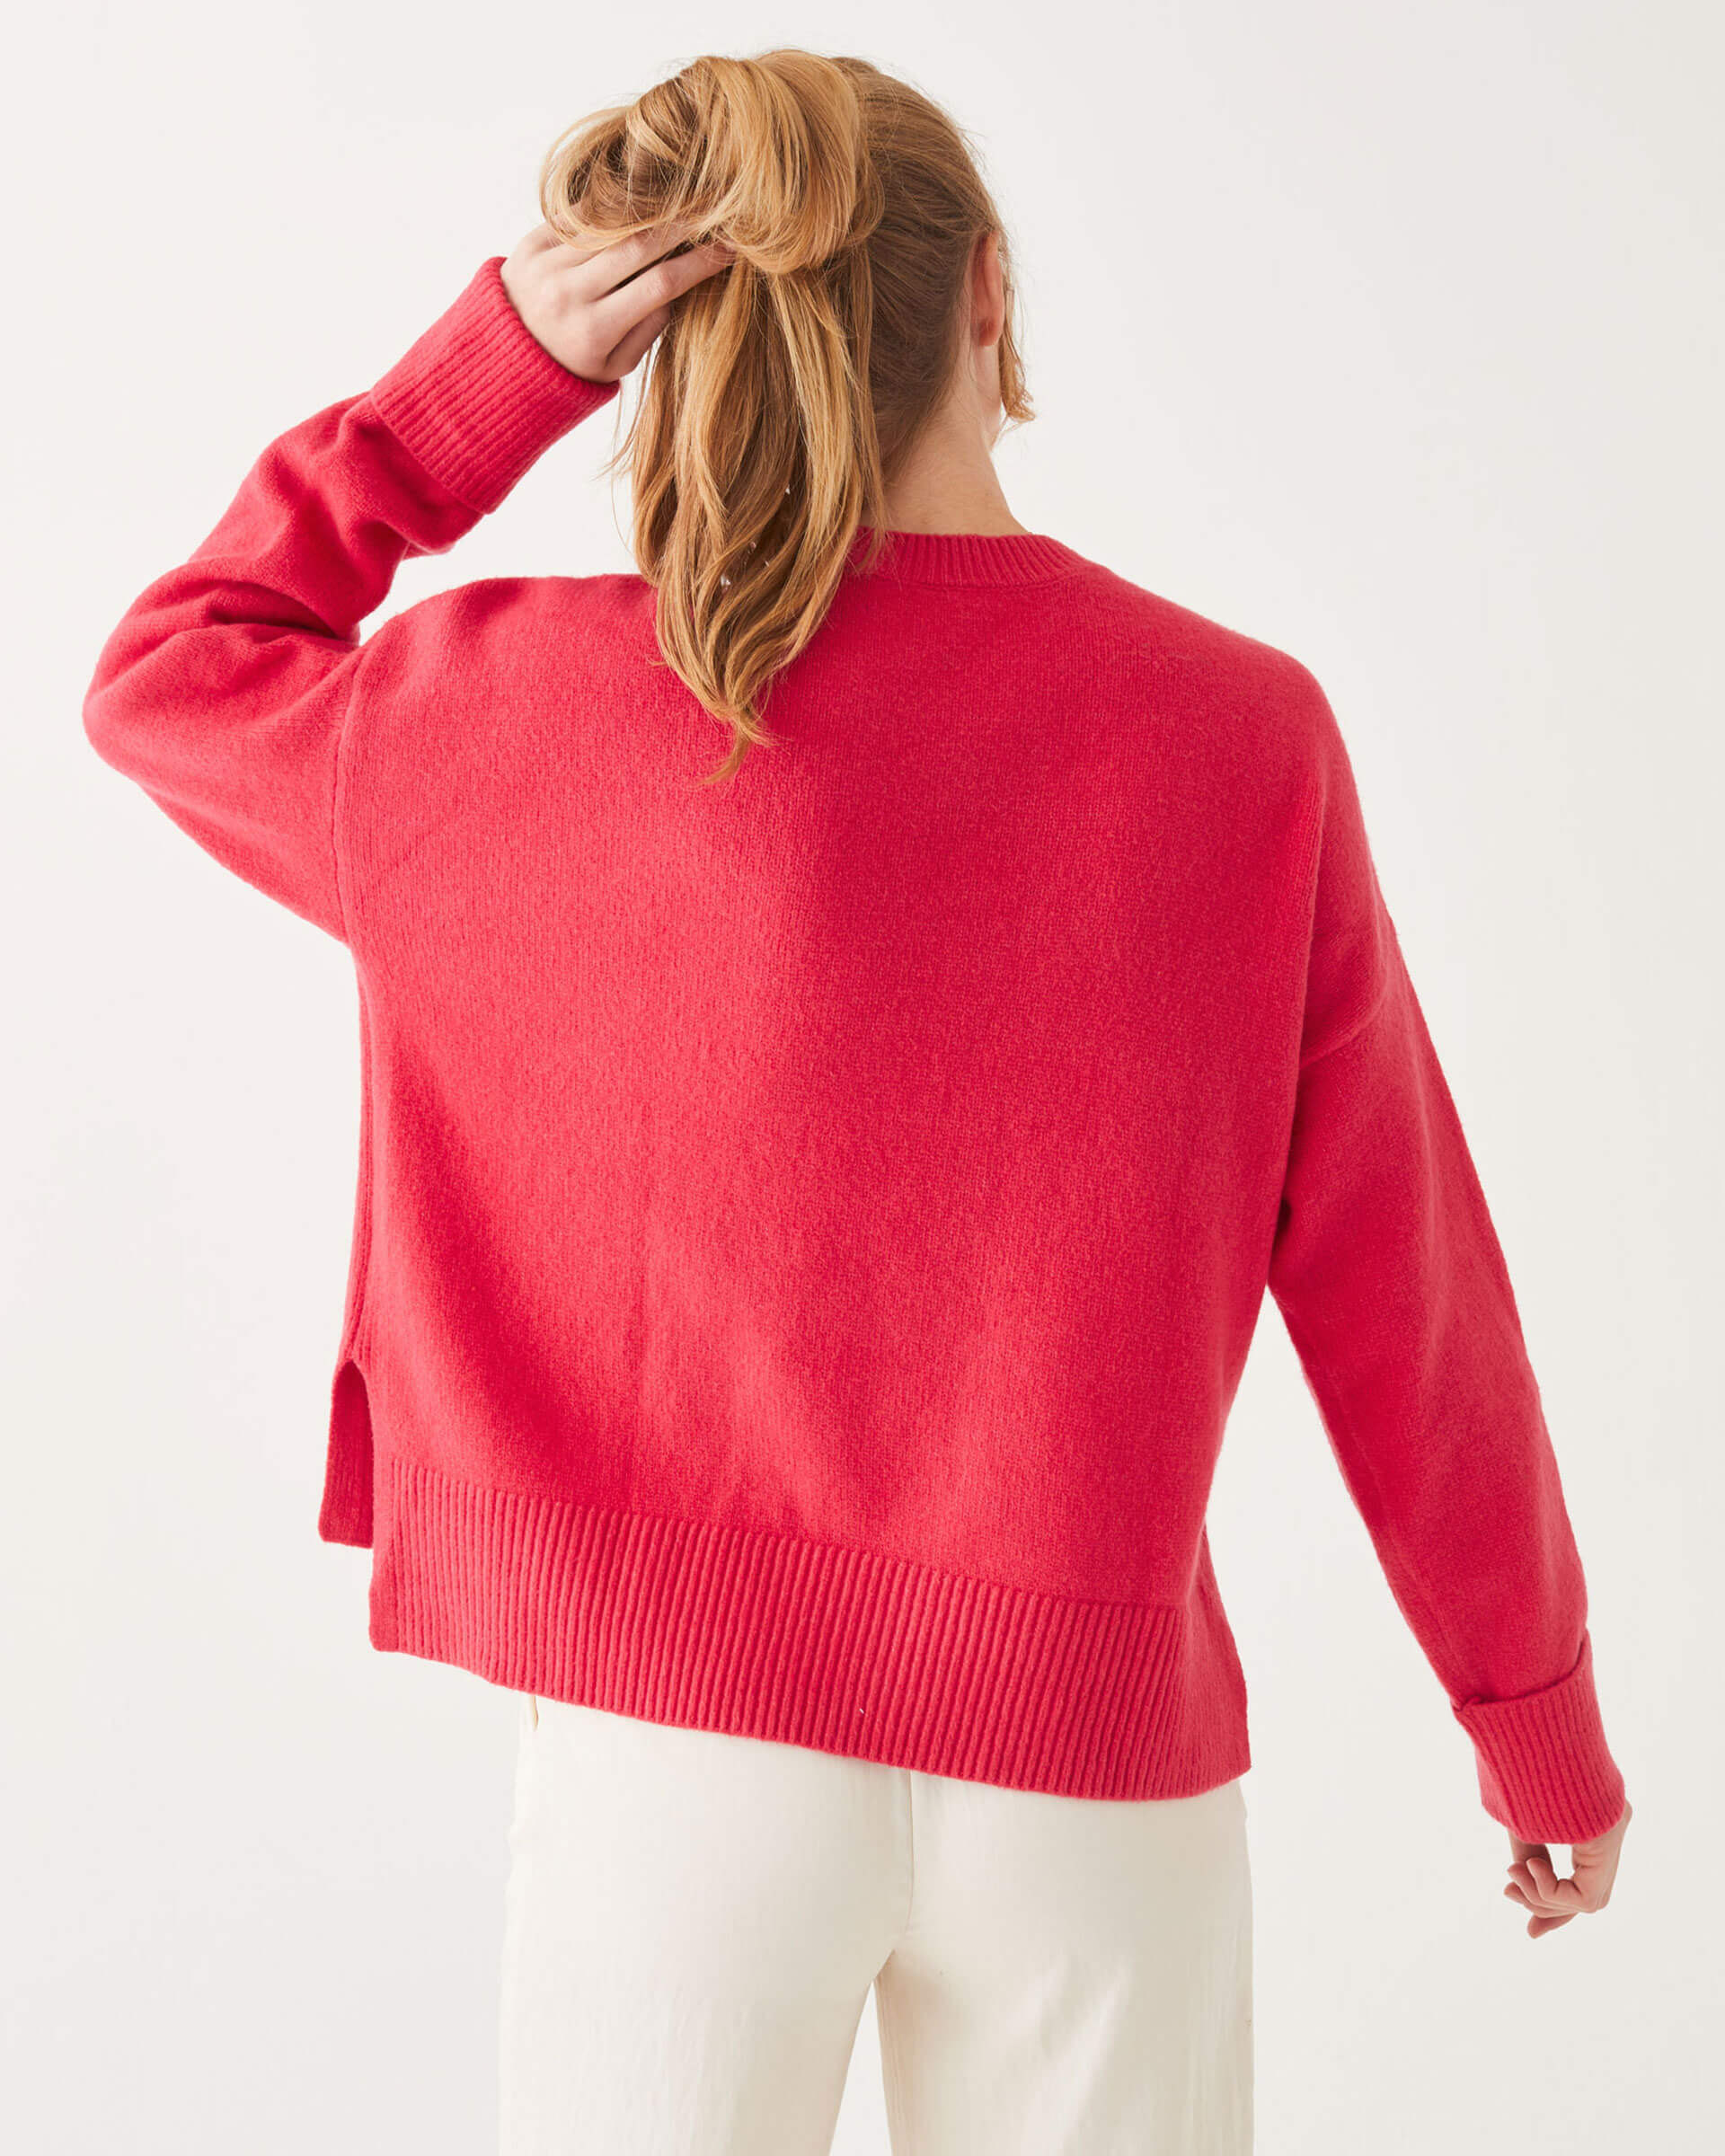 female wearing red crewneck sweater standing backwards holding her hair on a white background